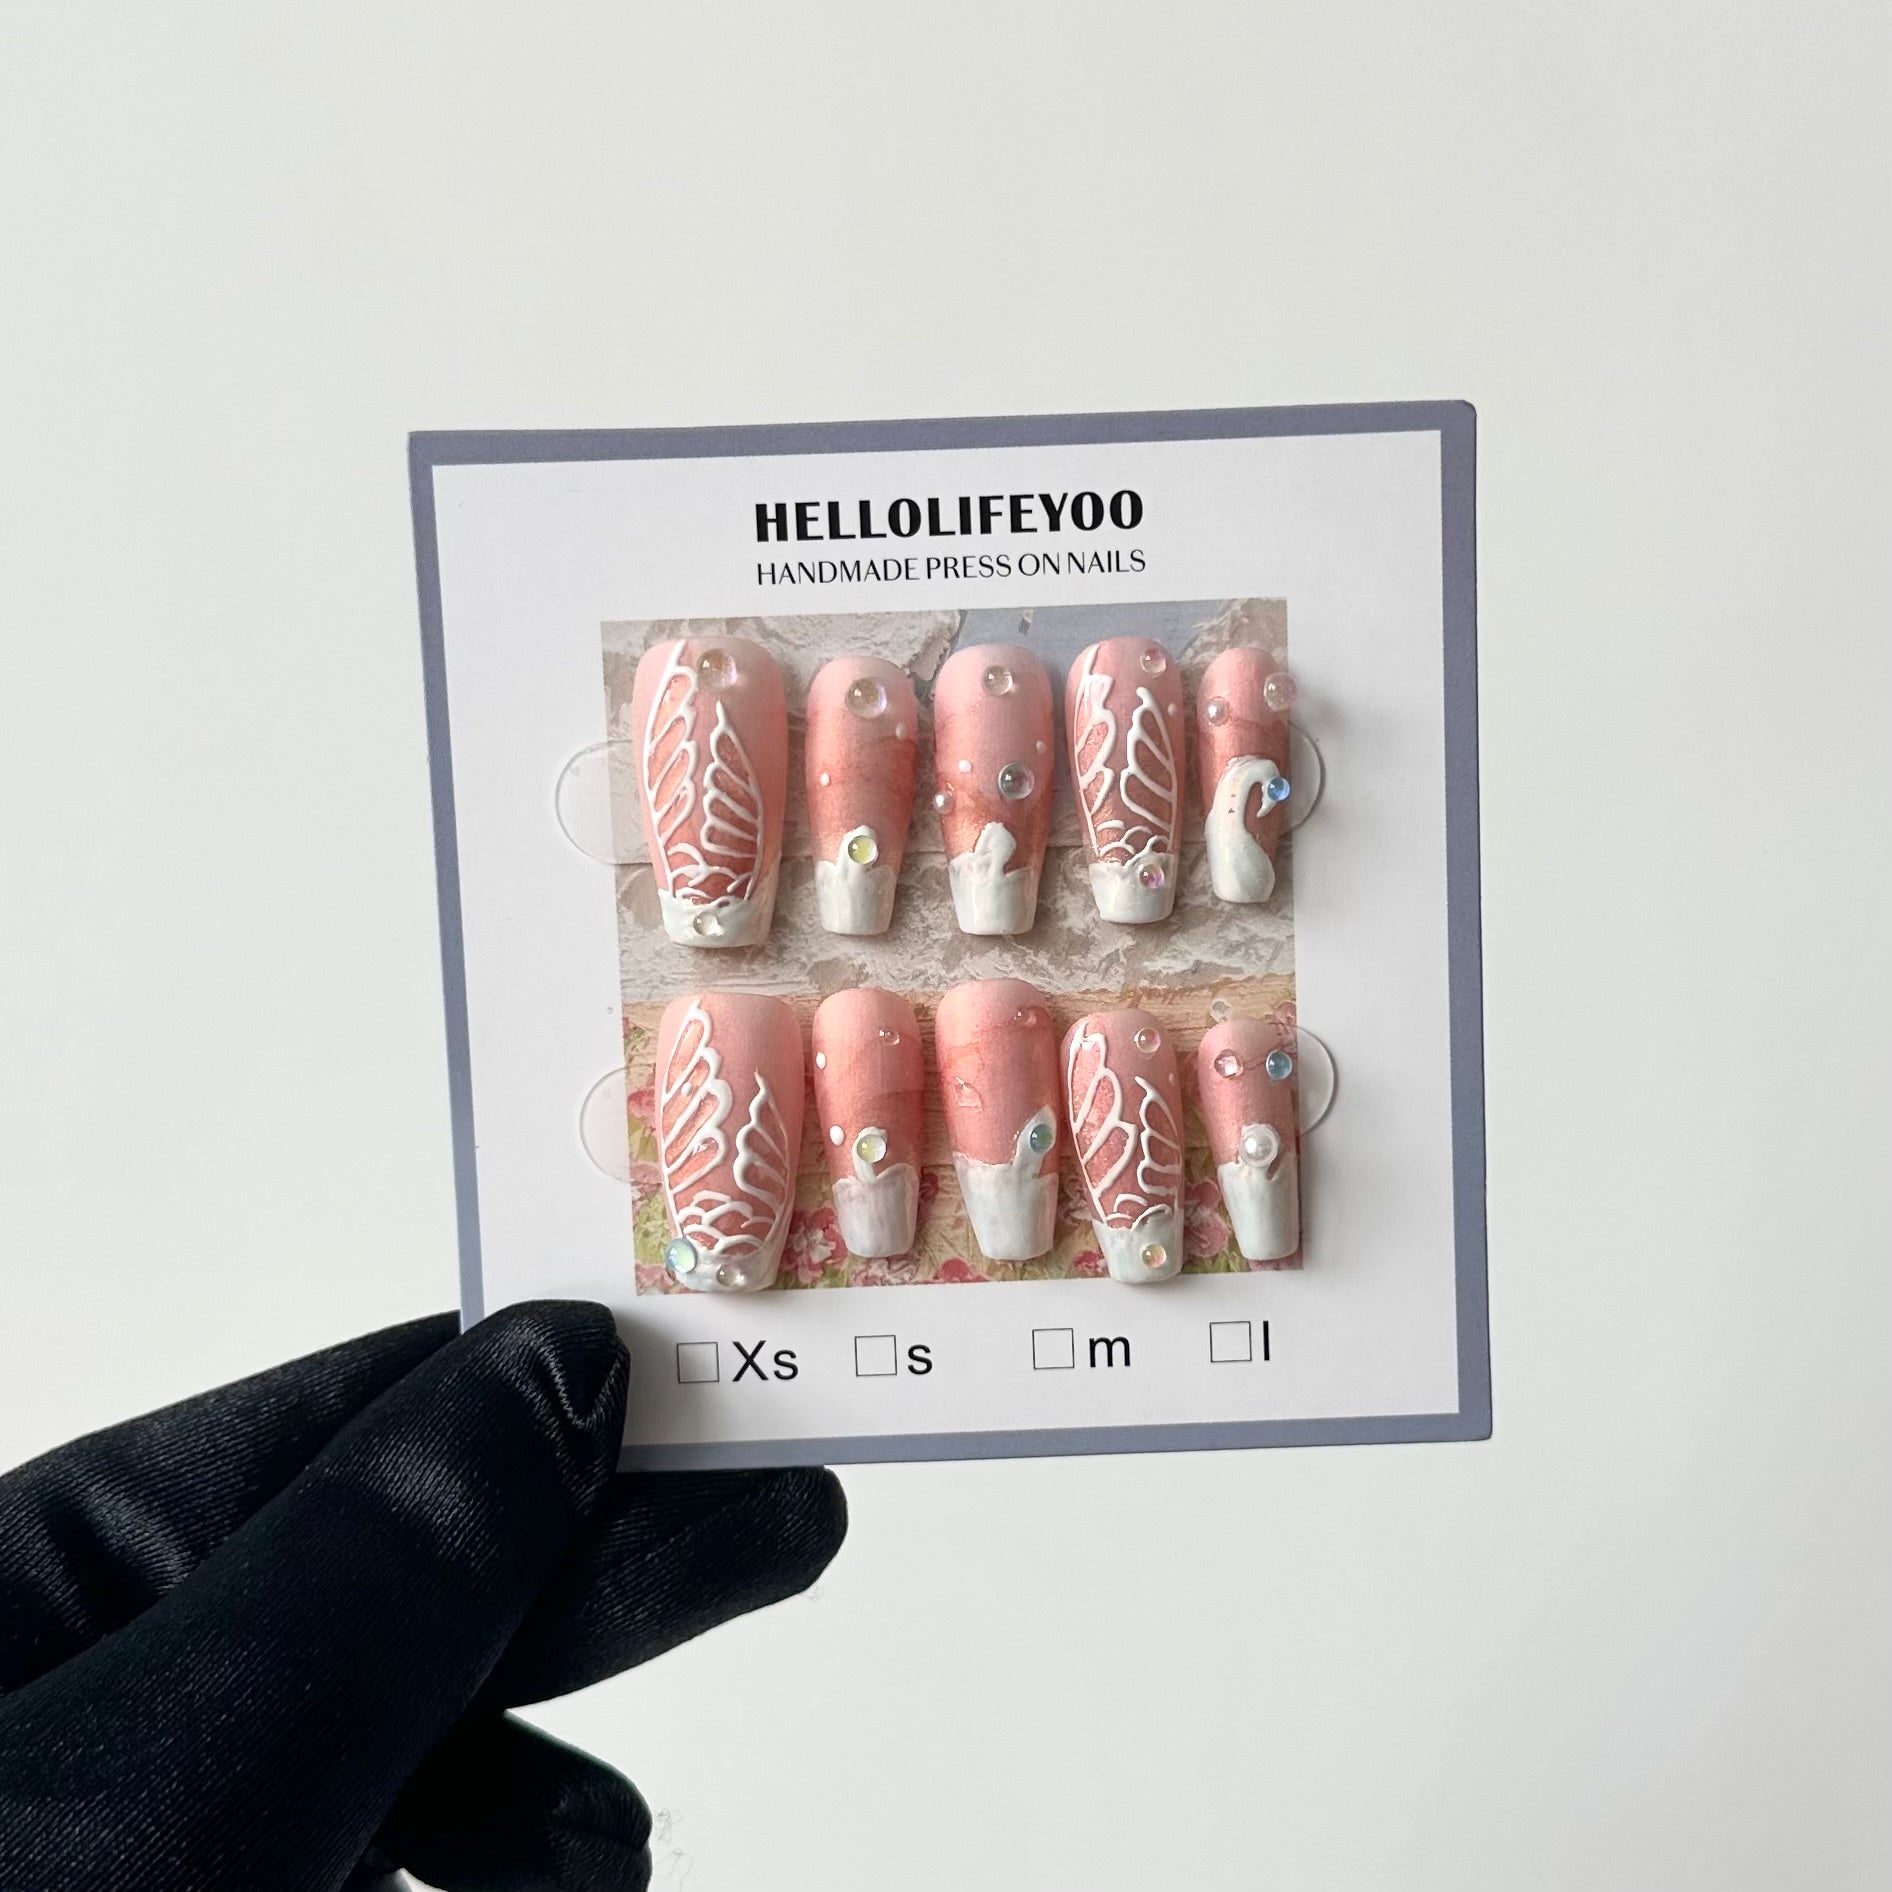 【HANDMADE】MERMAID LEGEND - TEN PIECES OF HANDCRAFTED PRESS ON NAIL